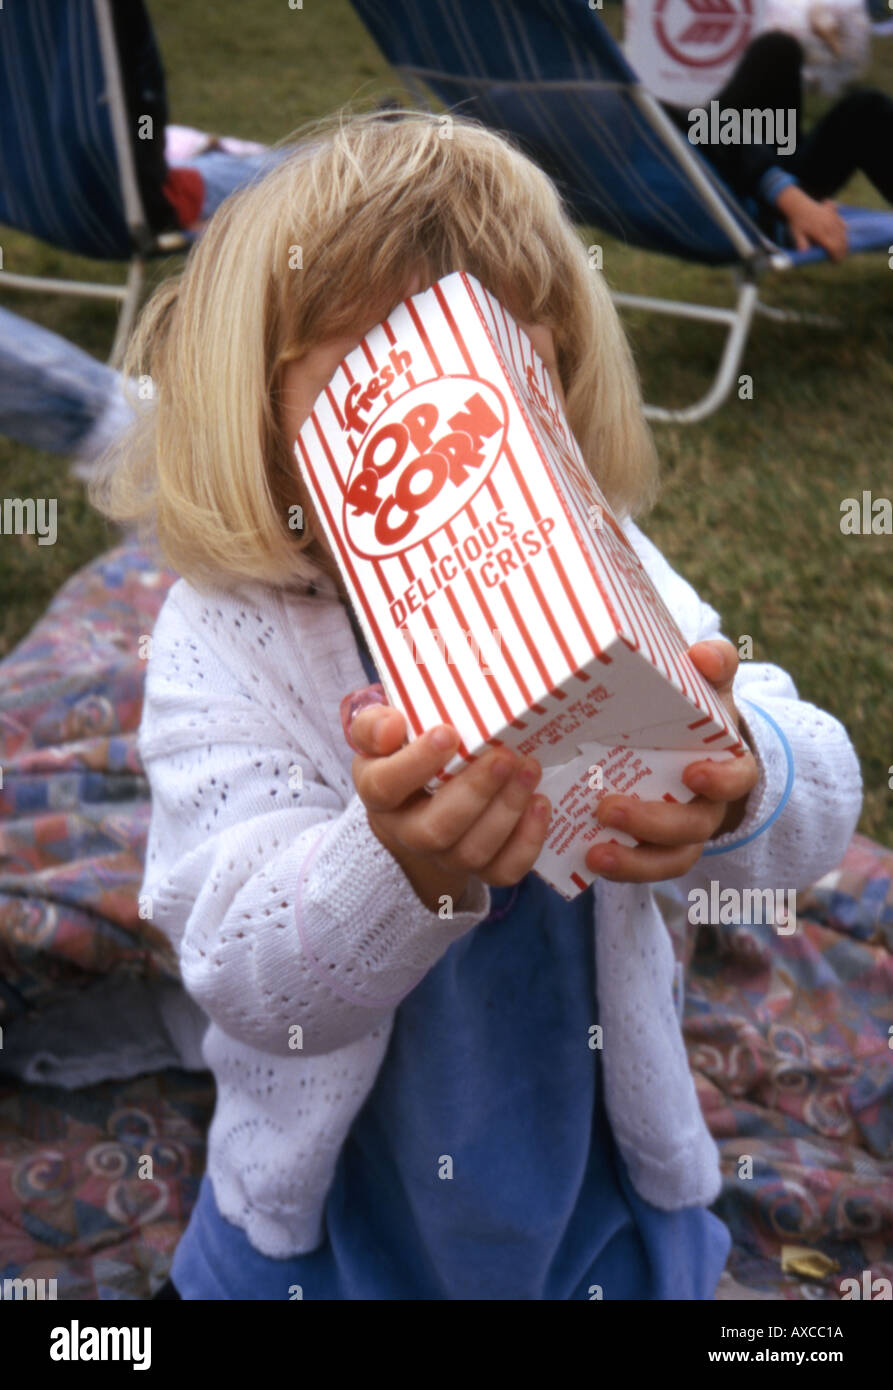 Young girl eating popcorn at a festival Stock Photo